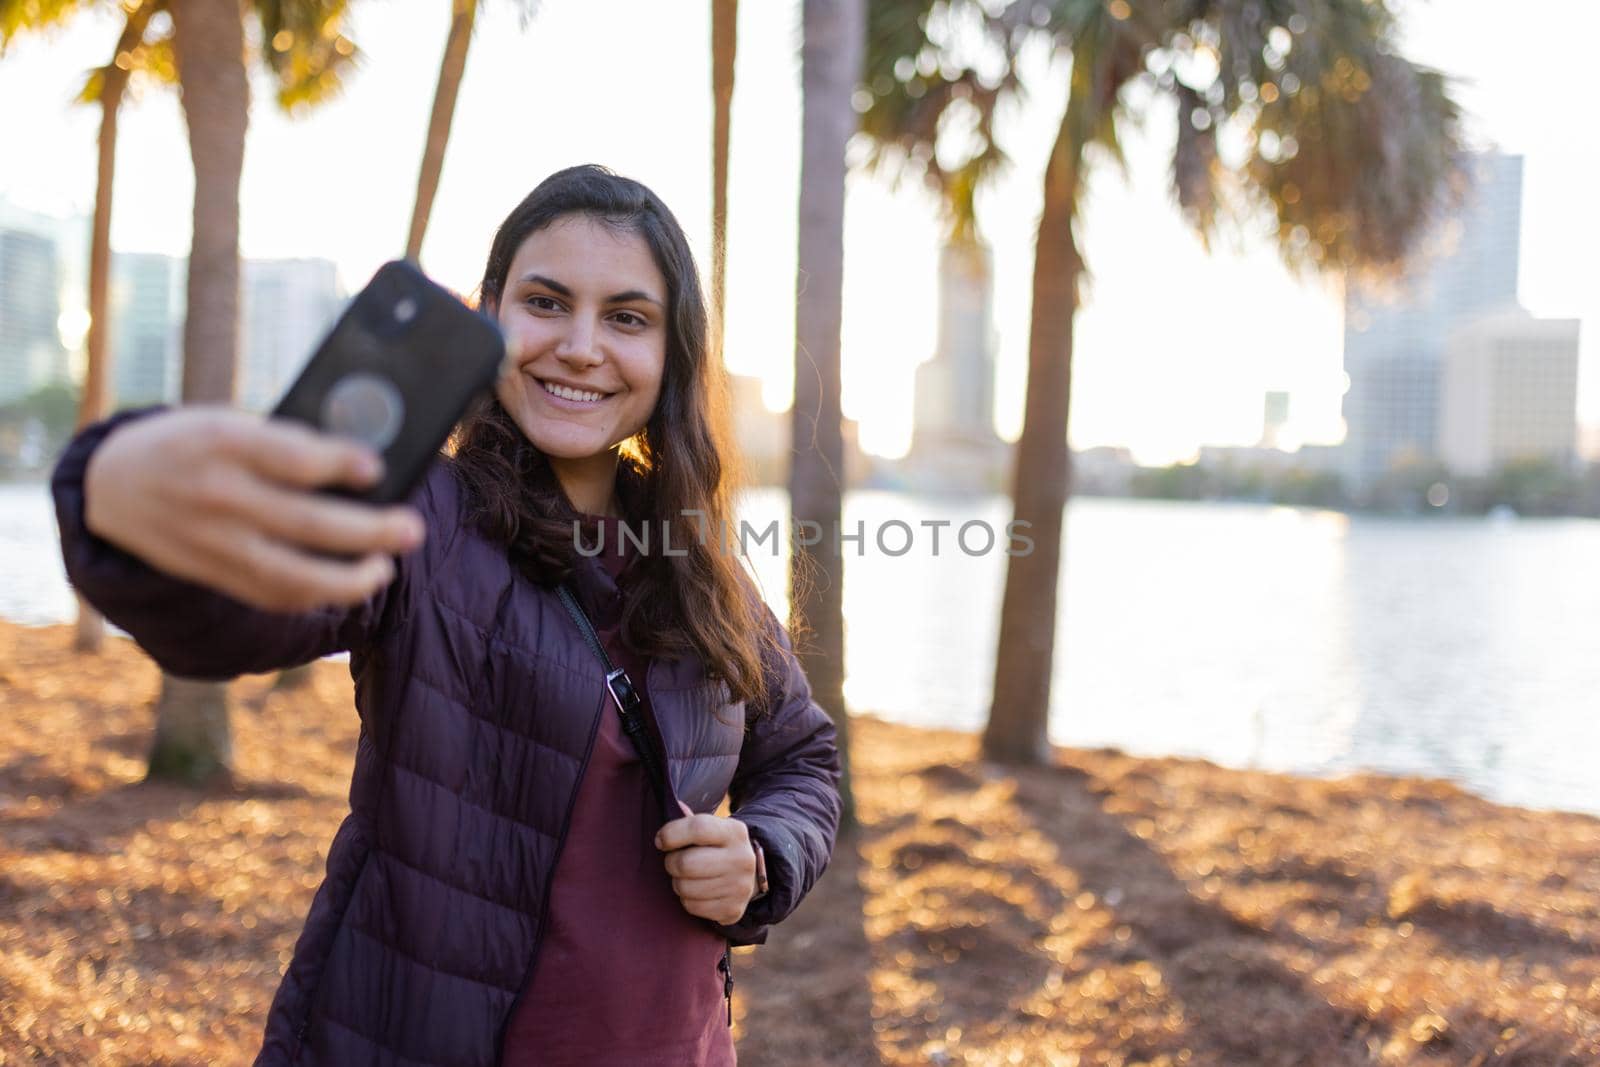 Beautiful view of smiling woman taking selfie with blurry palm trees, and bright sunset as background. Happy brunette woman in black jacket taking self-portrait near a lake. Adventurous day outdoors